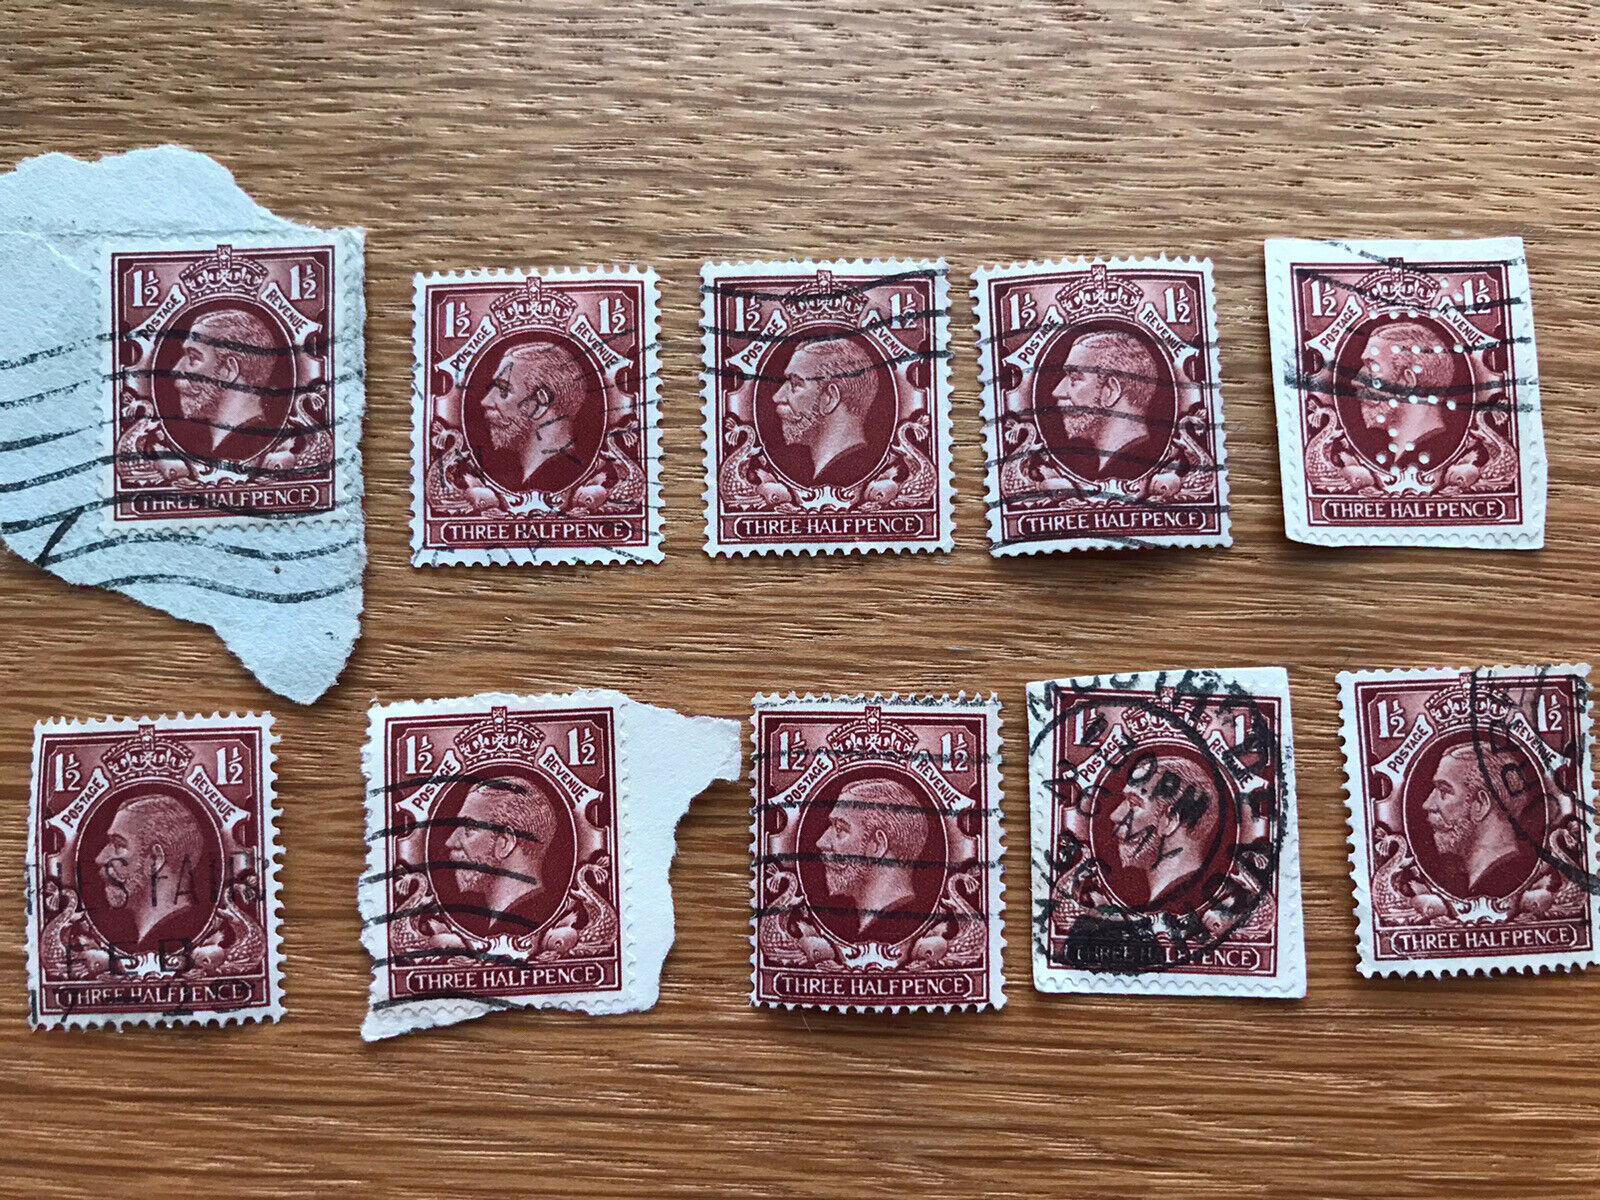 Great Britain King George V Three Half Pence Used Postage Stamps Lot 1912-13